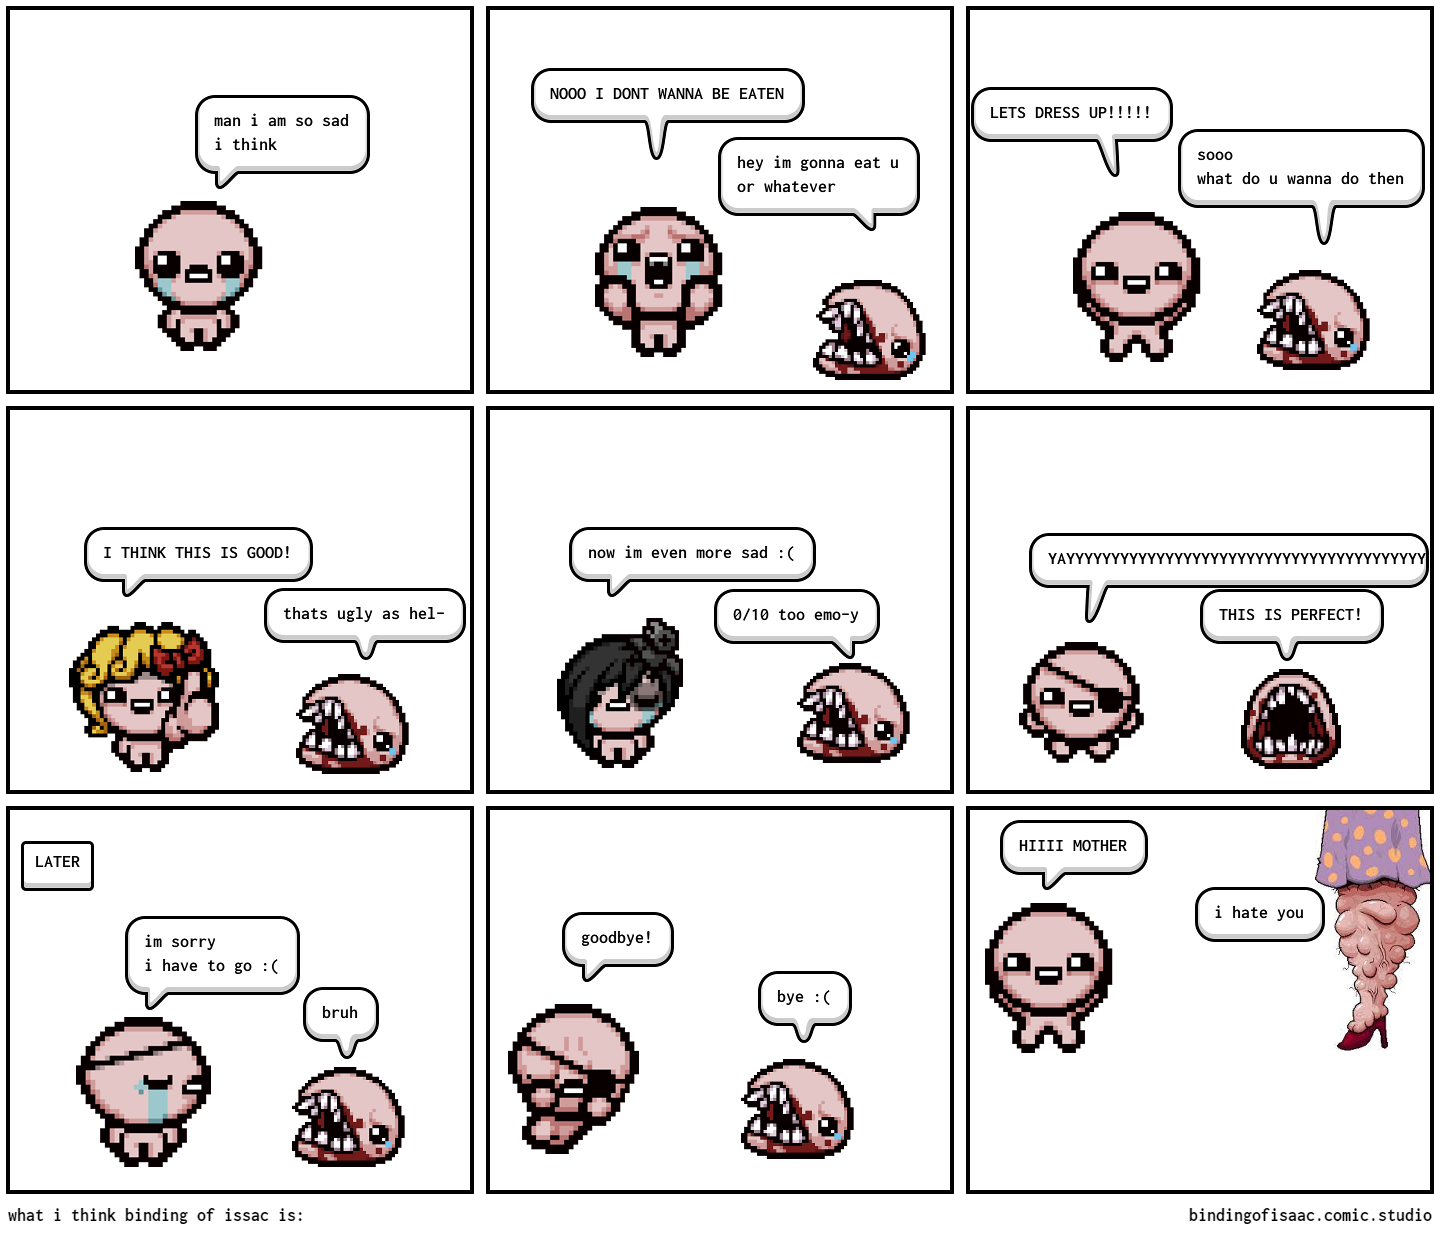 what i think binding of issac is: